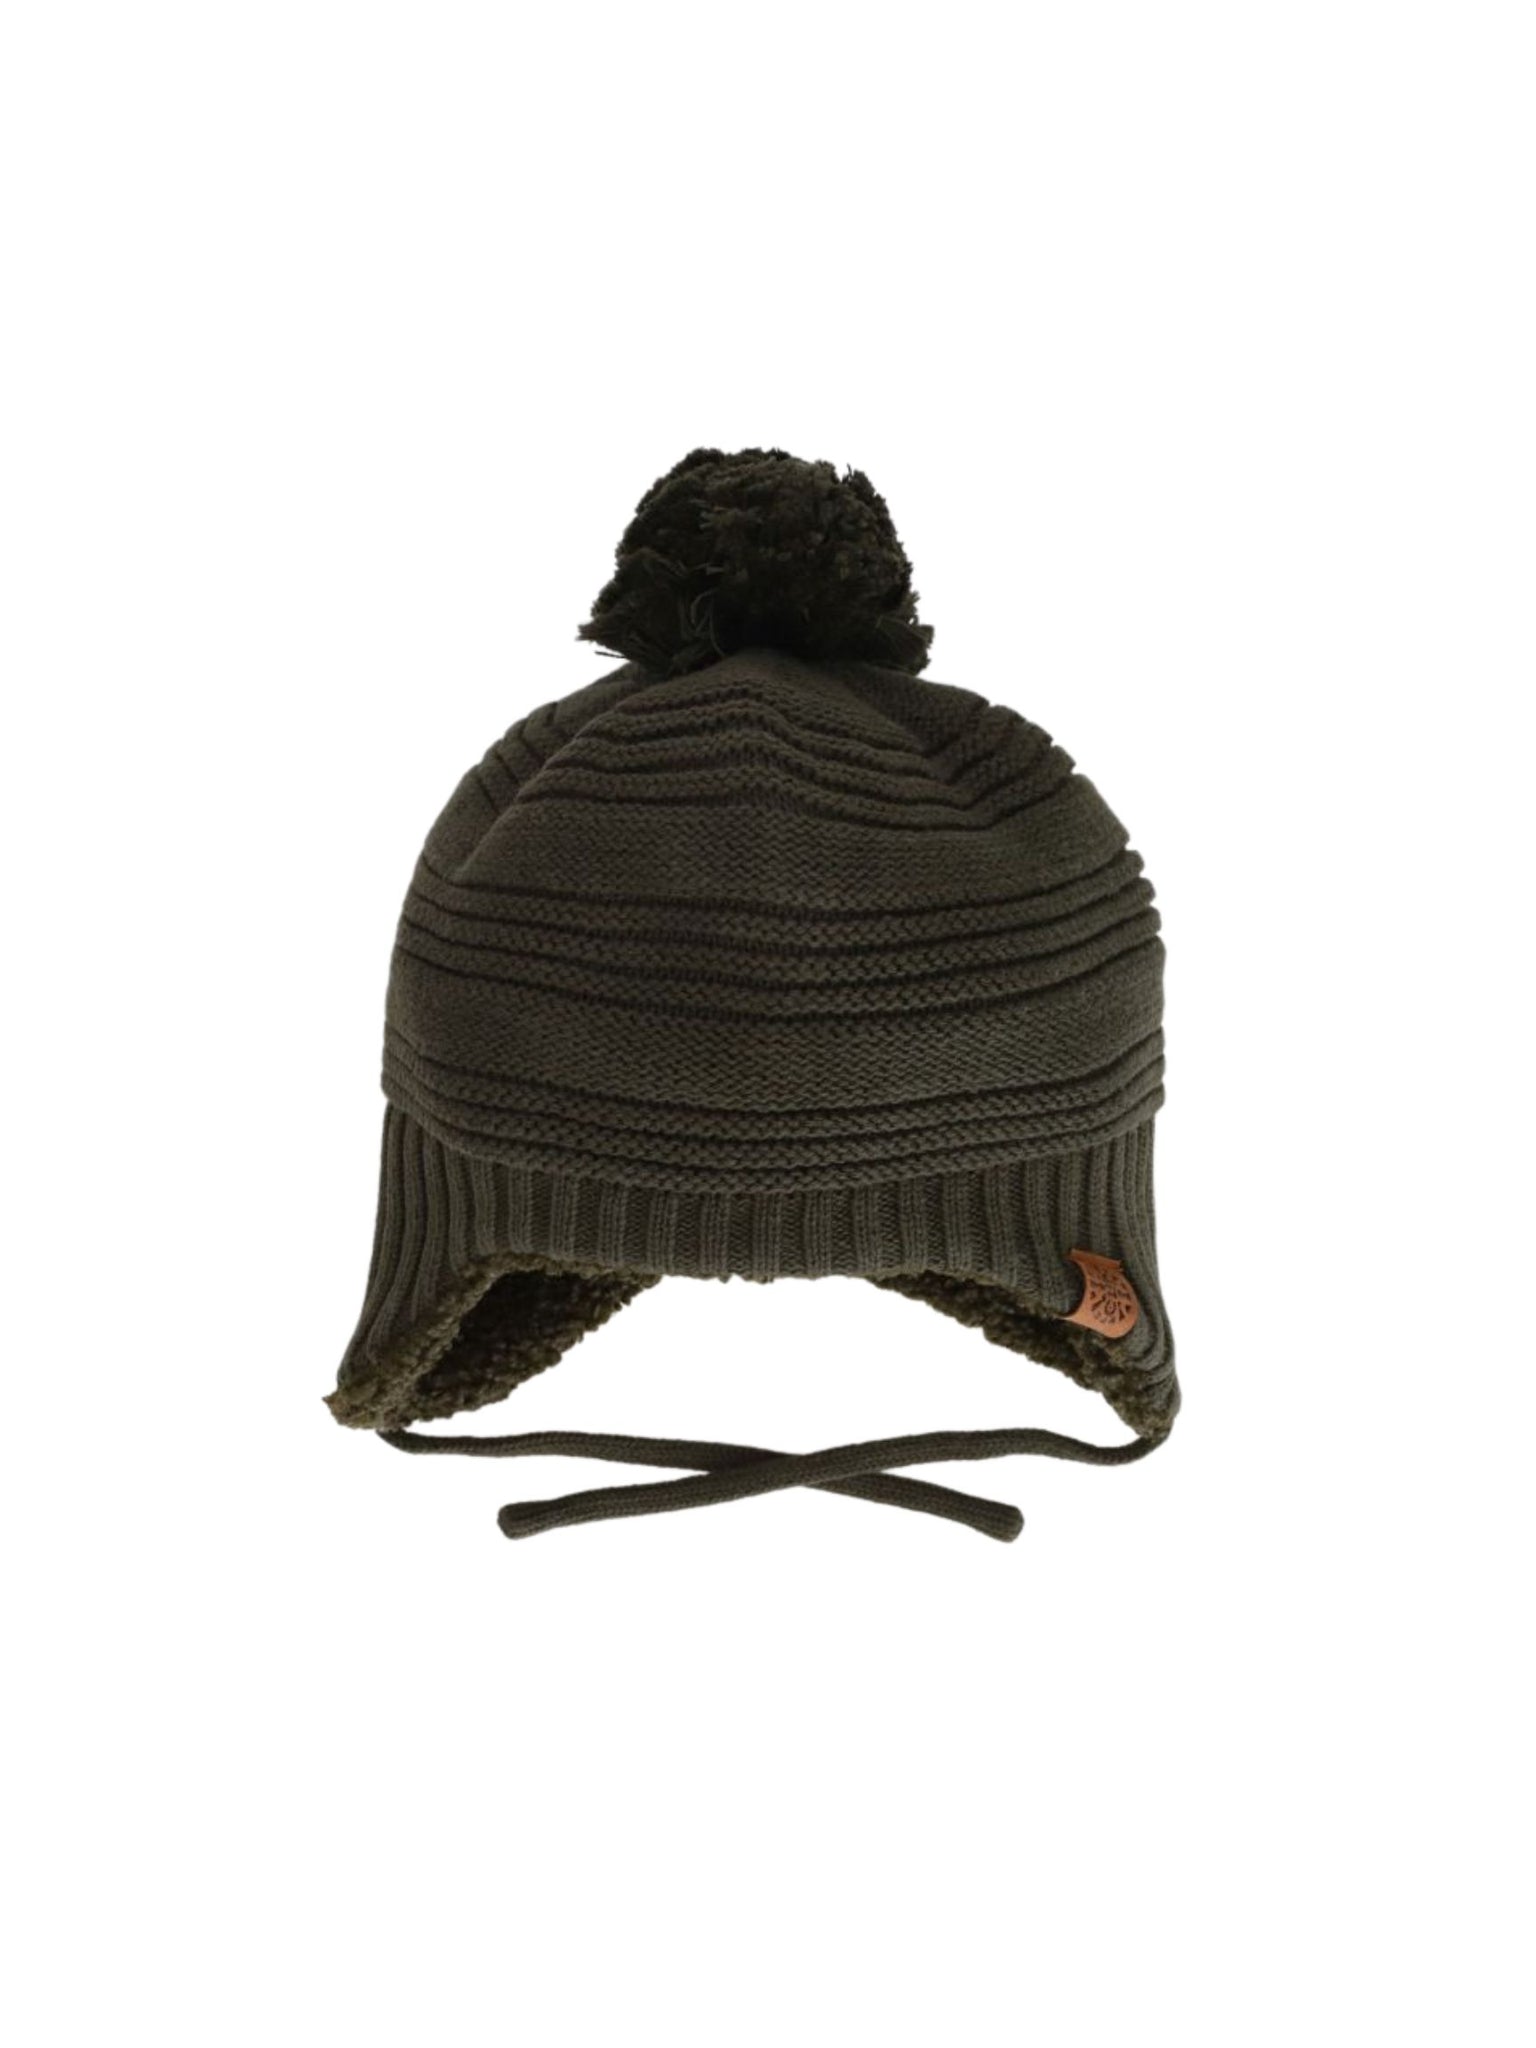 olive knit hat with pom and chin straps